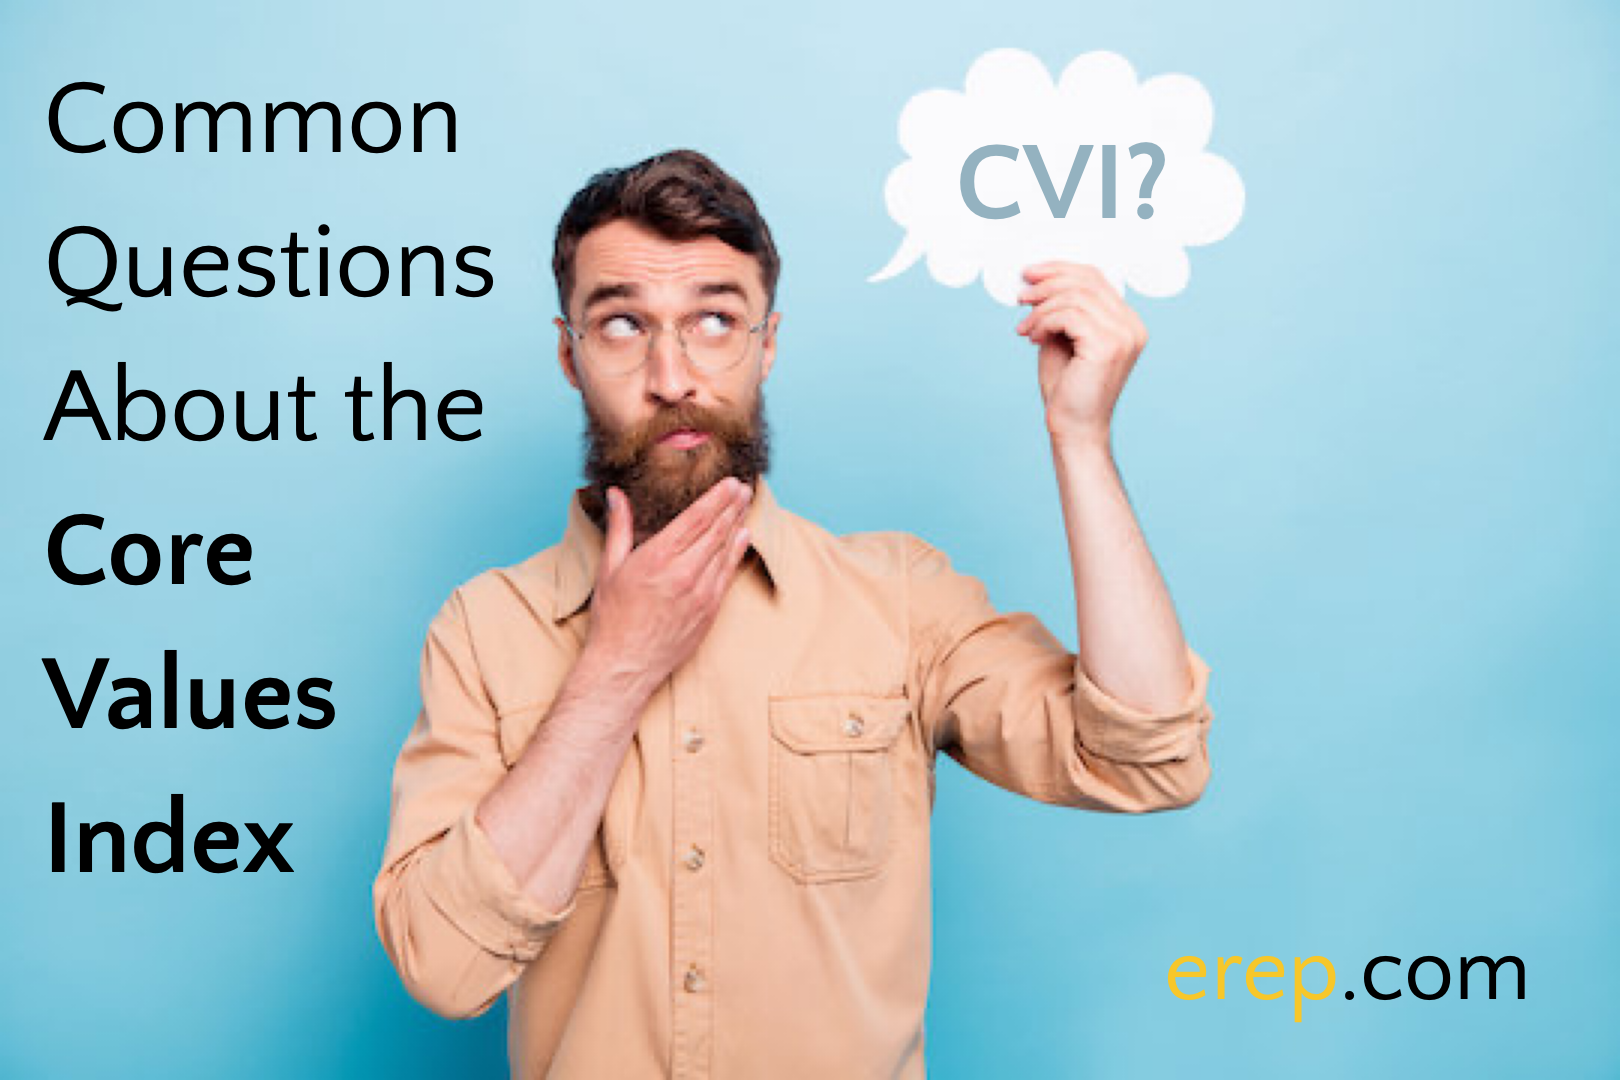 Common Questions About the CVI